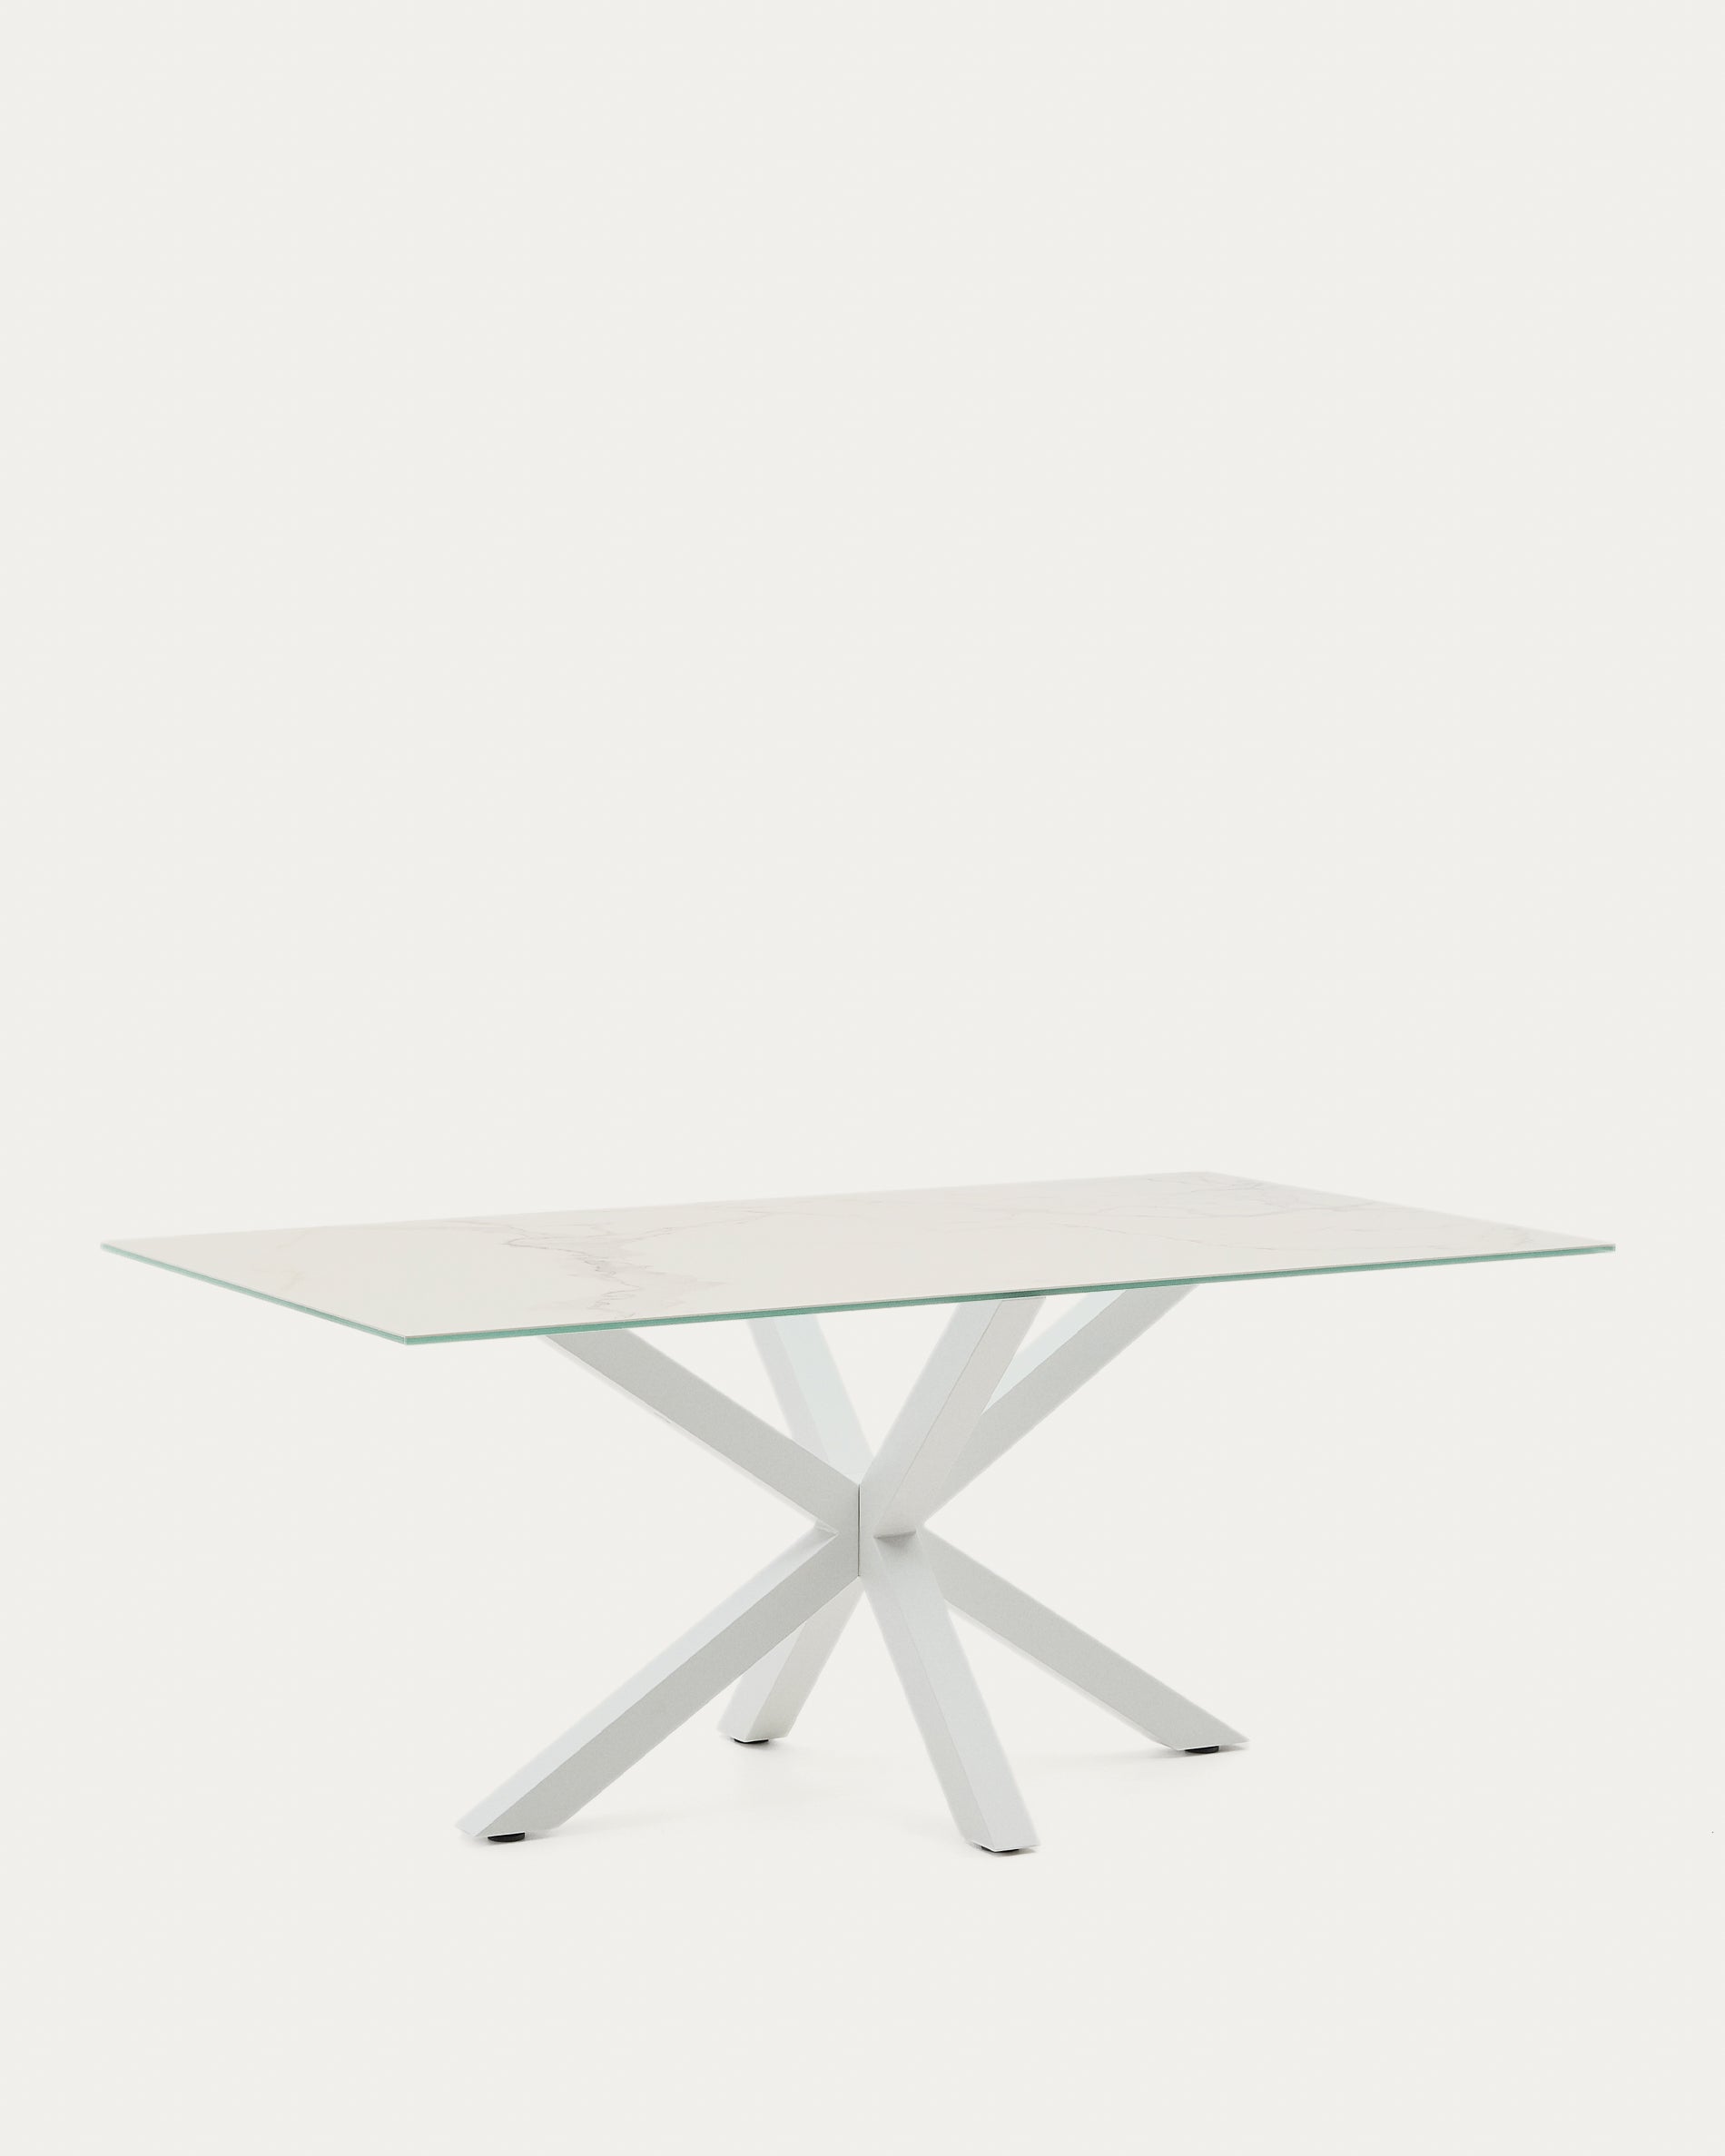 Argo table in white Kalos porcelain and steel legs with white finish, 180 x 100 cm